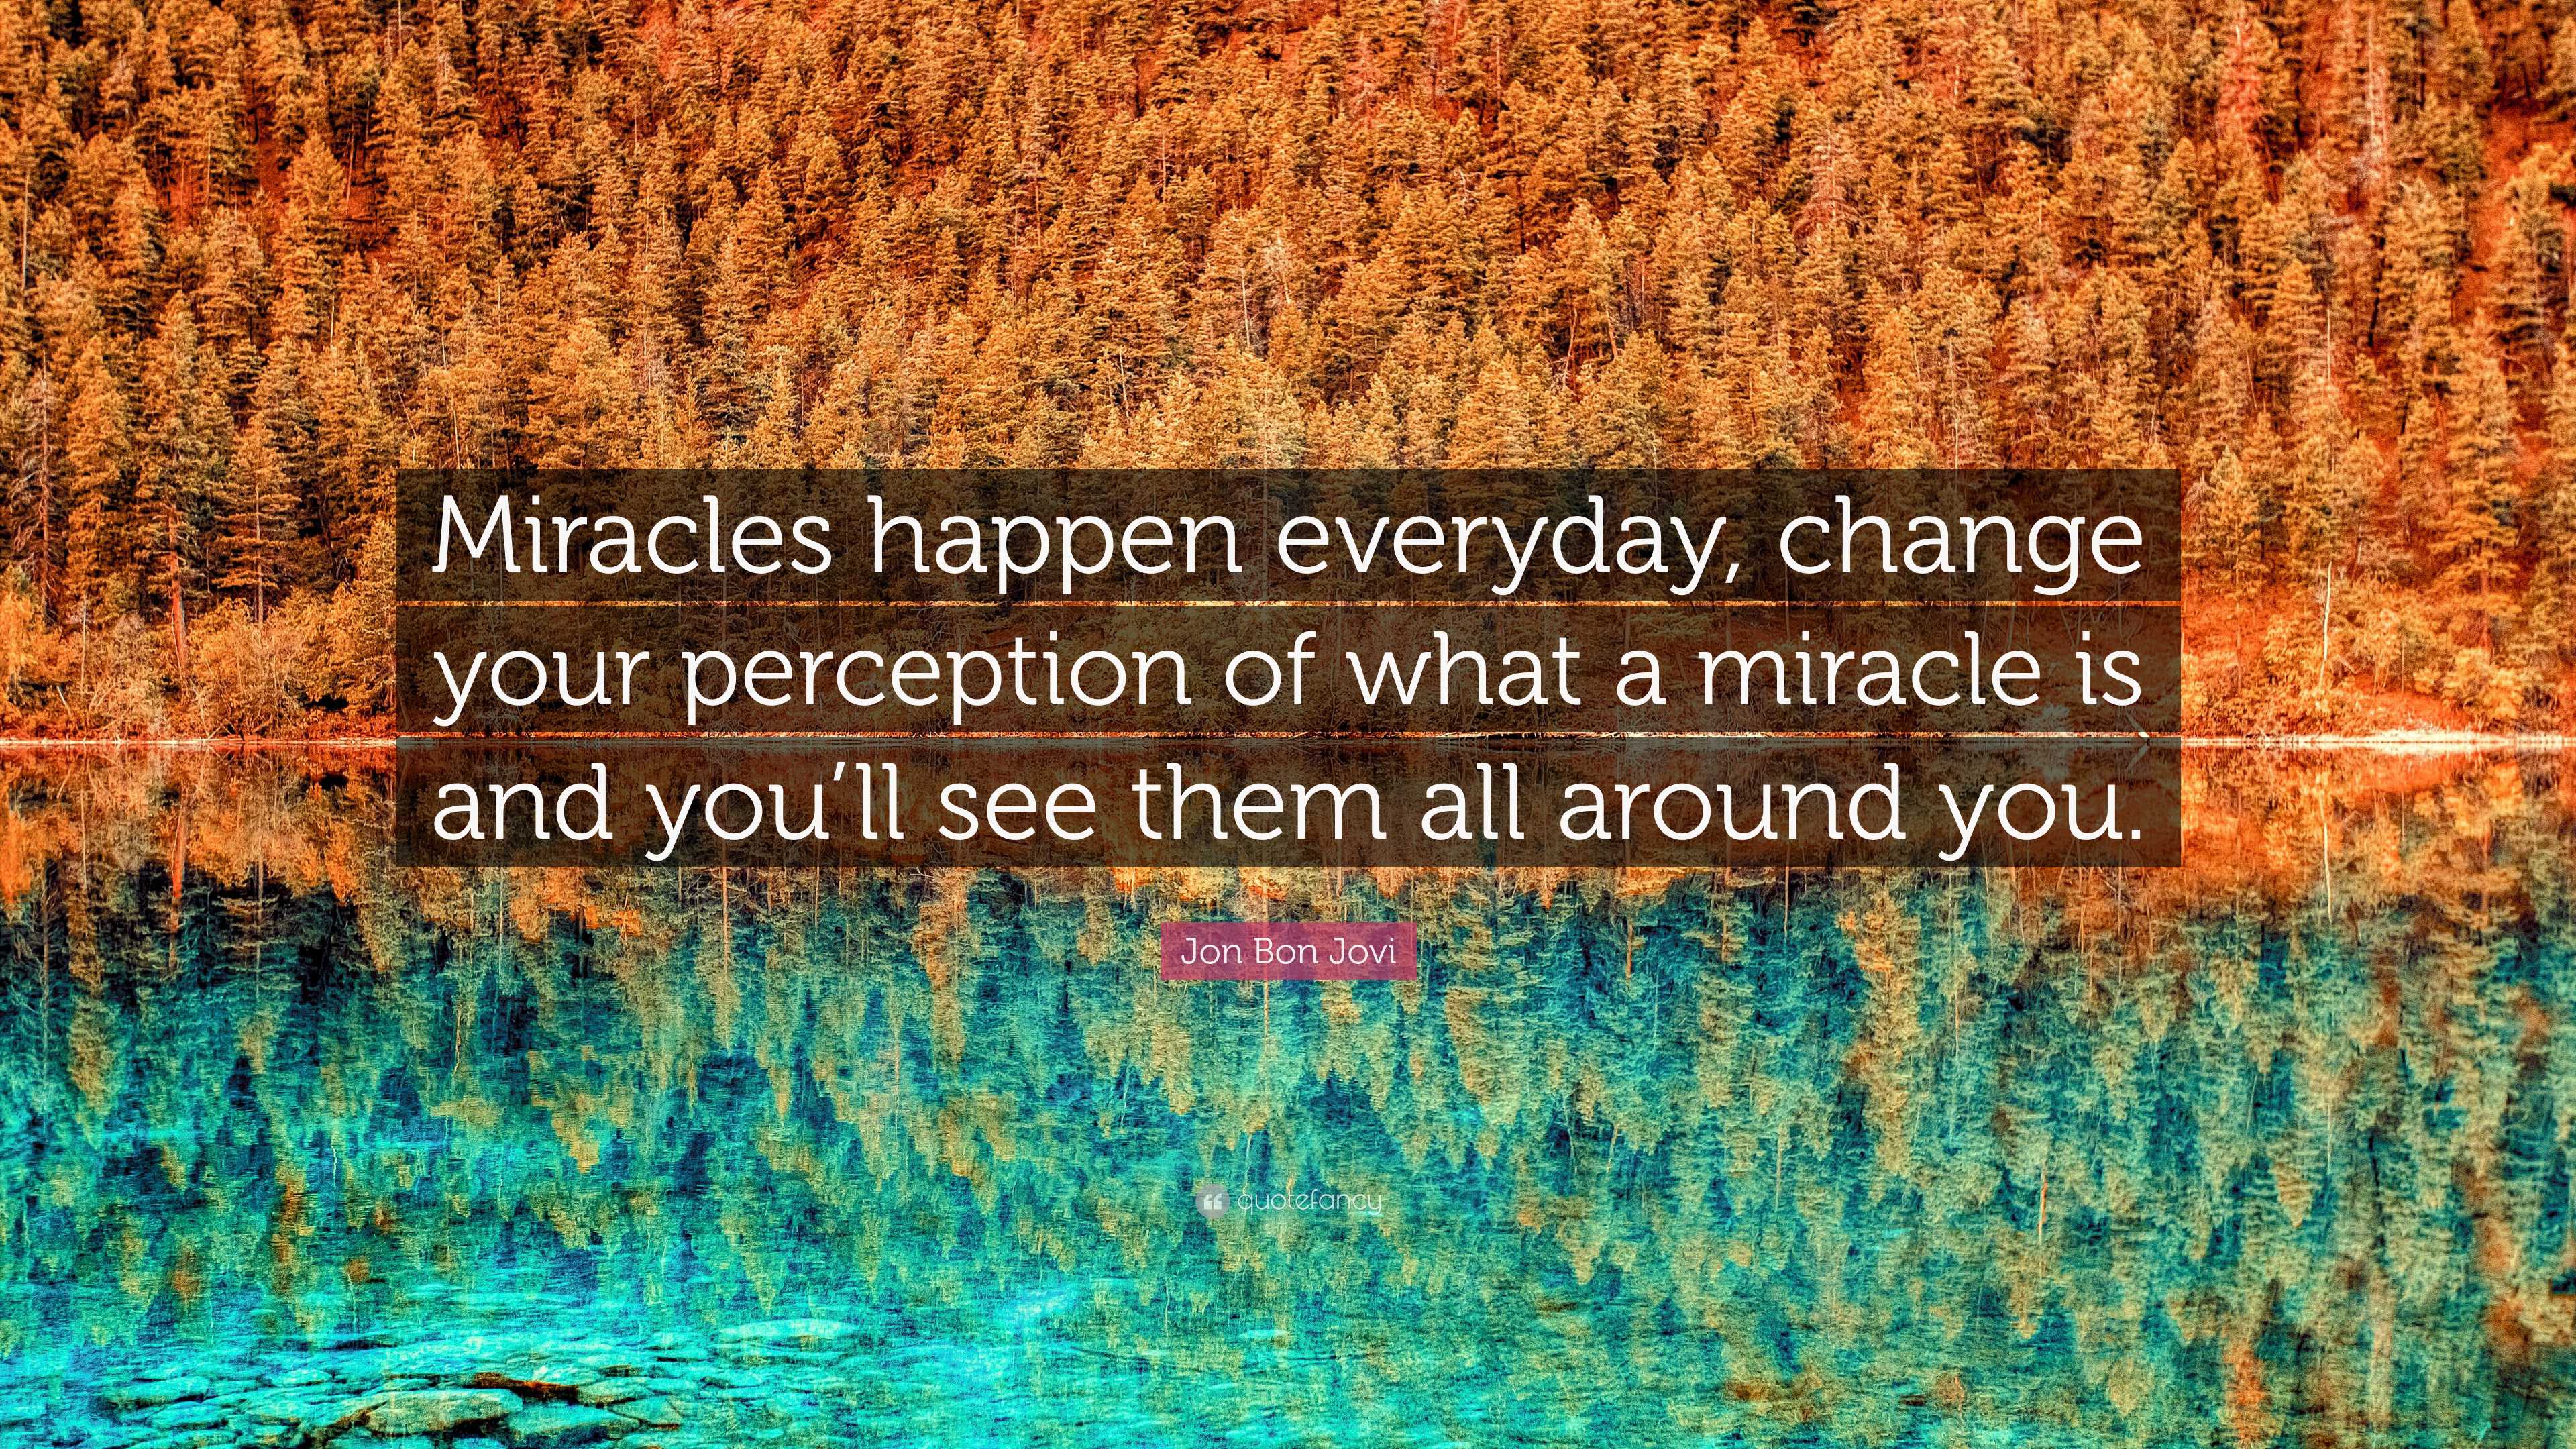 Jon Bon Jovi Quote: “Miracles happen everyday, change your perception of  what a miracle is and